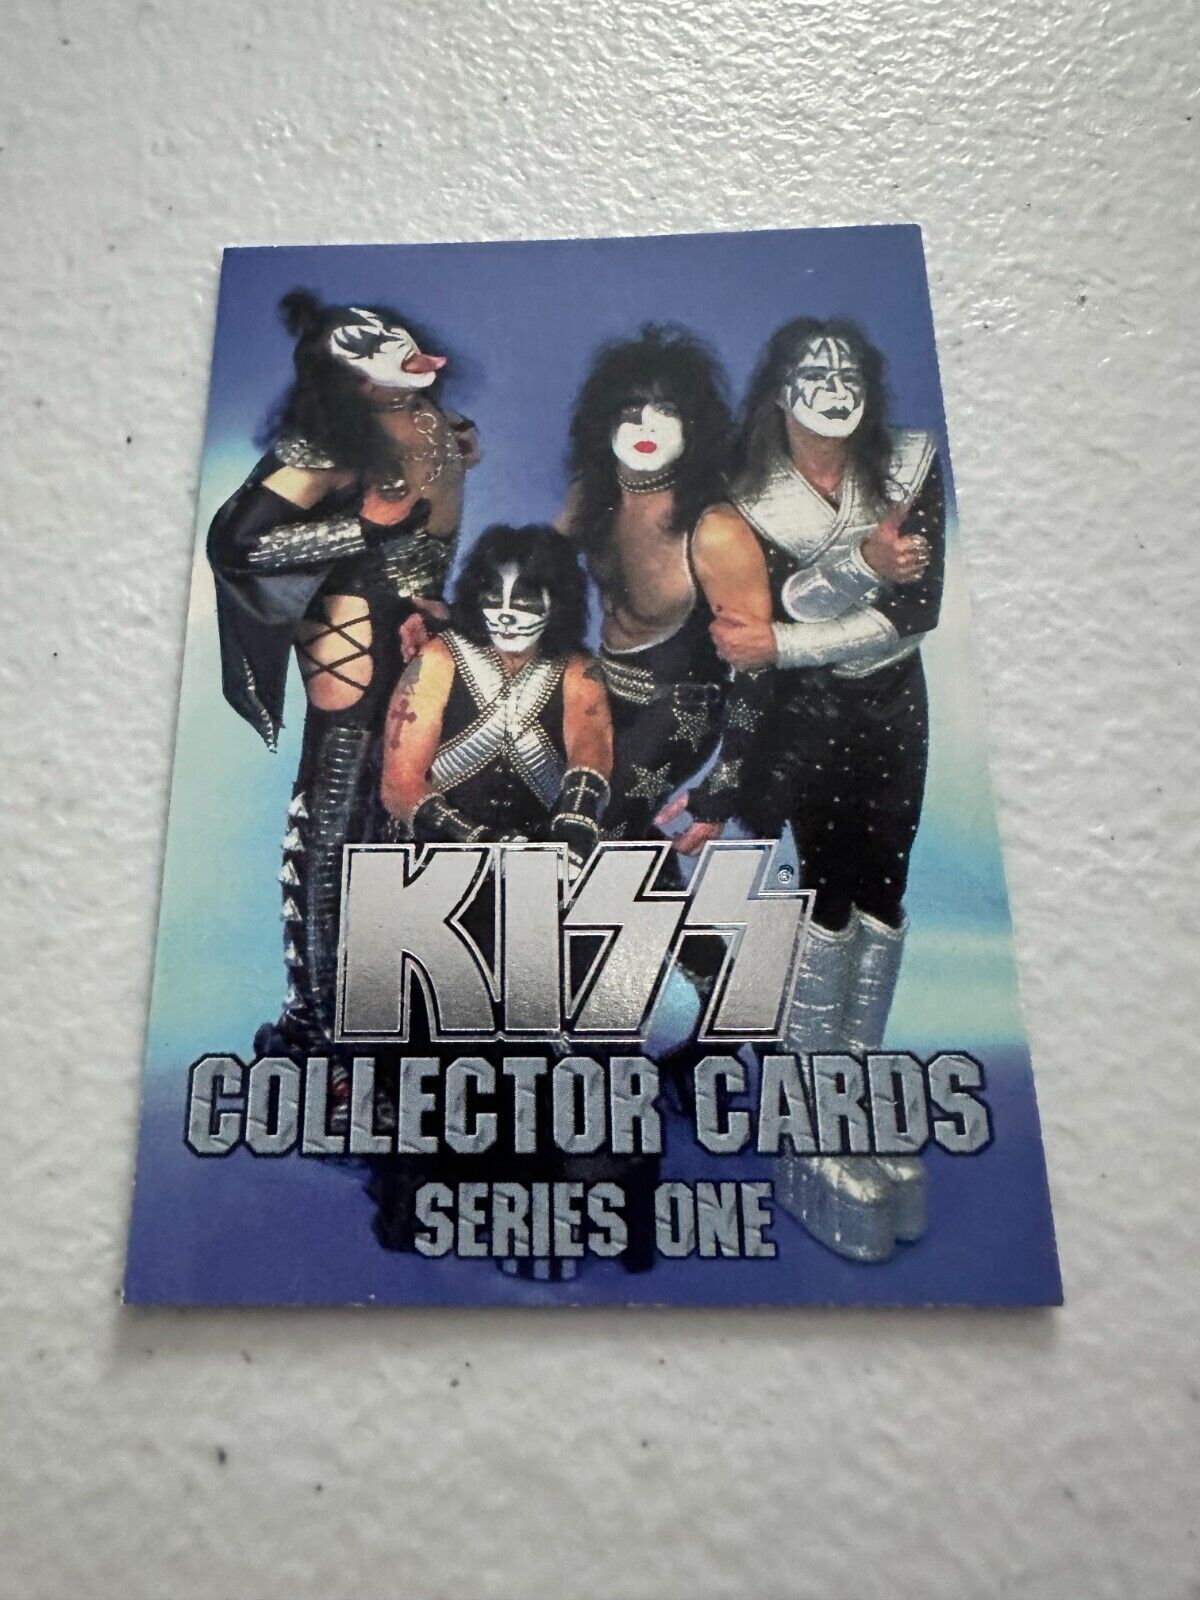 KISS - Trading Cards Silver Foil VG+ 1997 Collector Series One - Gene Simmons